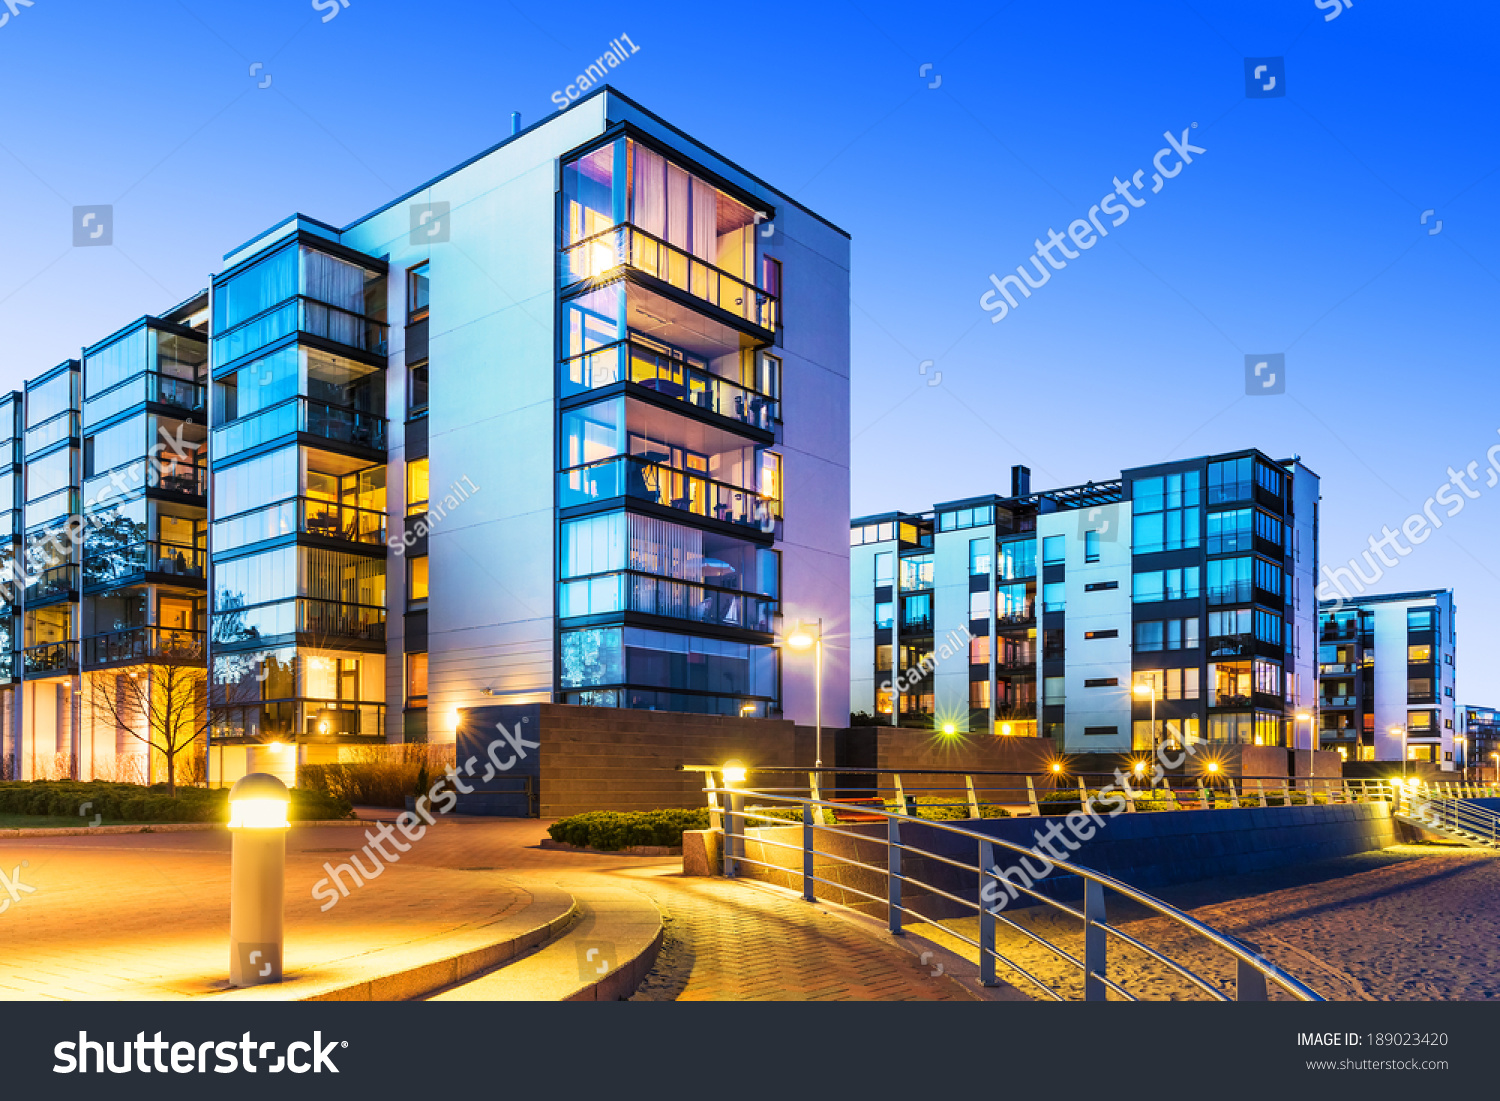 House building and city construction concept: evening outdoor urban view of modern real estate homes #189023420